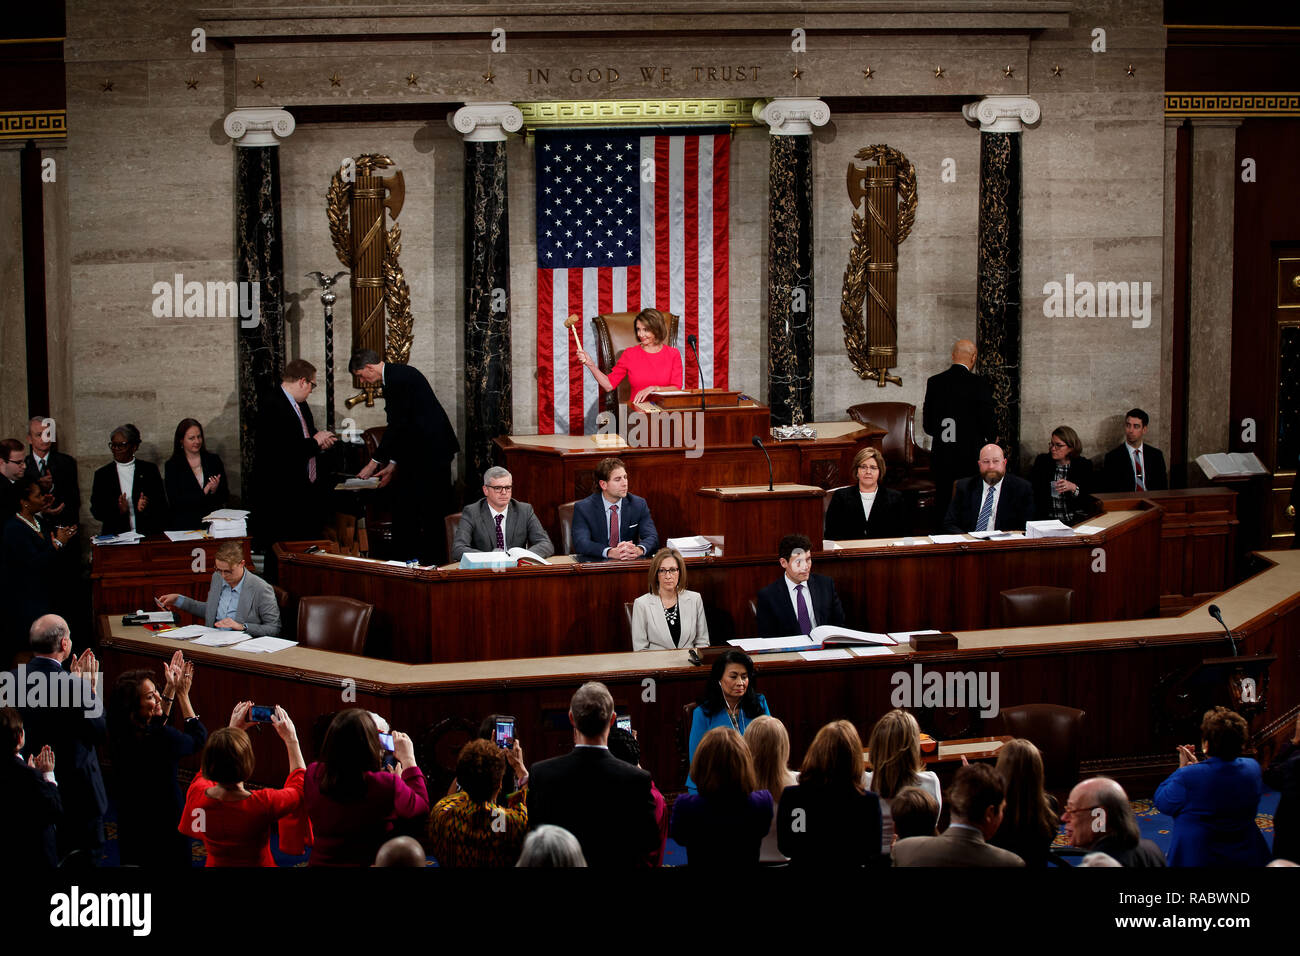 Washington, USA. 3rd Jan, 2019. Nancy Pelosi (C, Rear) holds the gavel after being elected the new speaker of the U.S. House of Representatives on Capitol Hill in Washington, DC, the United States, on Jan. 3, 2019. Representative Nancy Pelosi, a California Democrat, was elected the new speaker of the U.S. House of Representatives Thursday, the first day of a new, divided Congress. Credit: Ting Shen/Xinhua/Alamy Live News Stock Photo